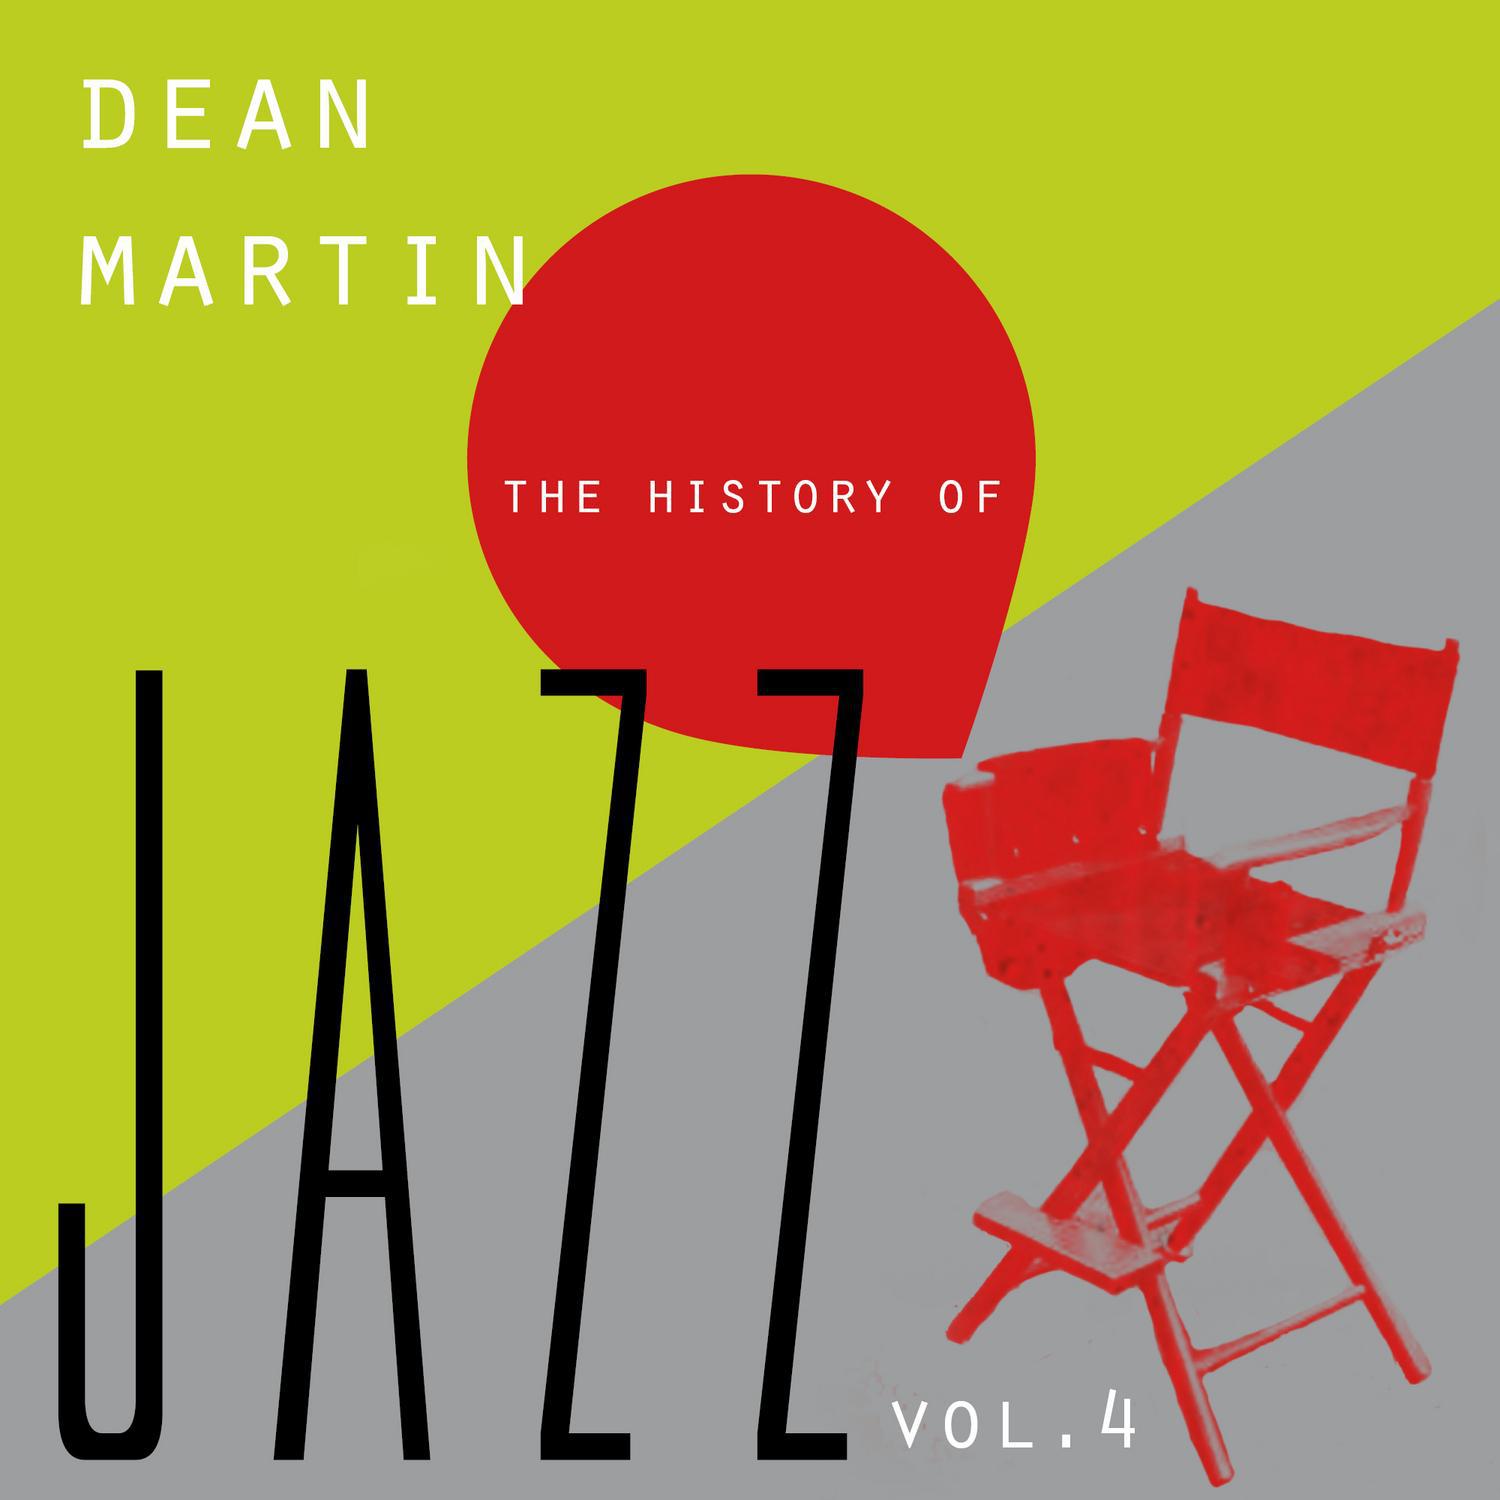 The History of Jazz Vol. 4